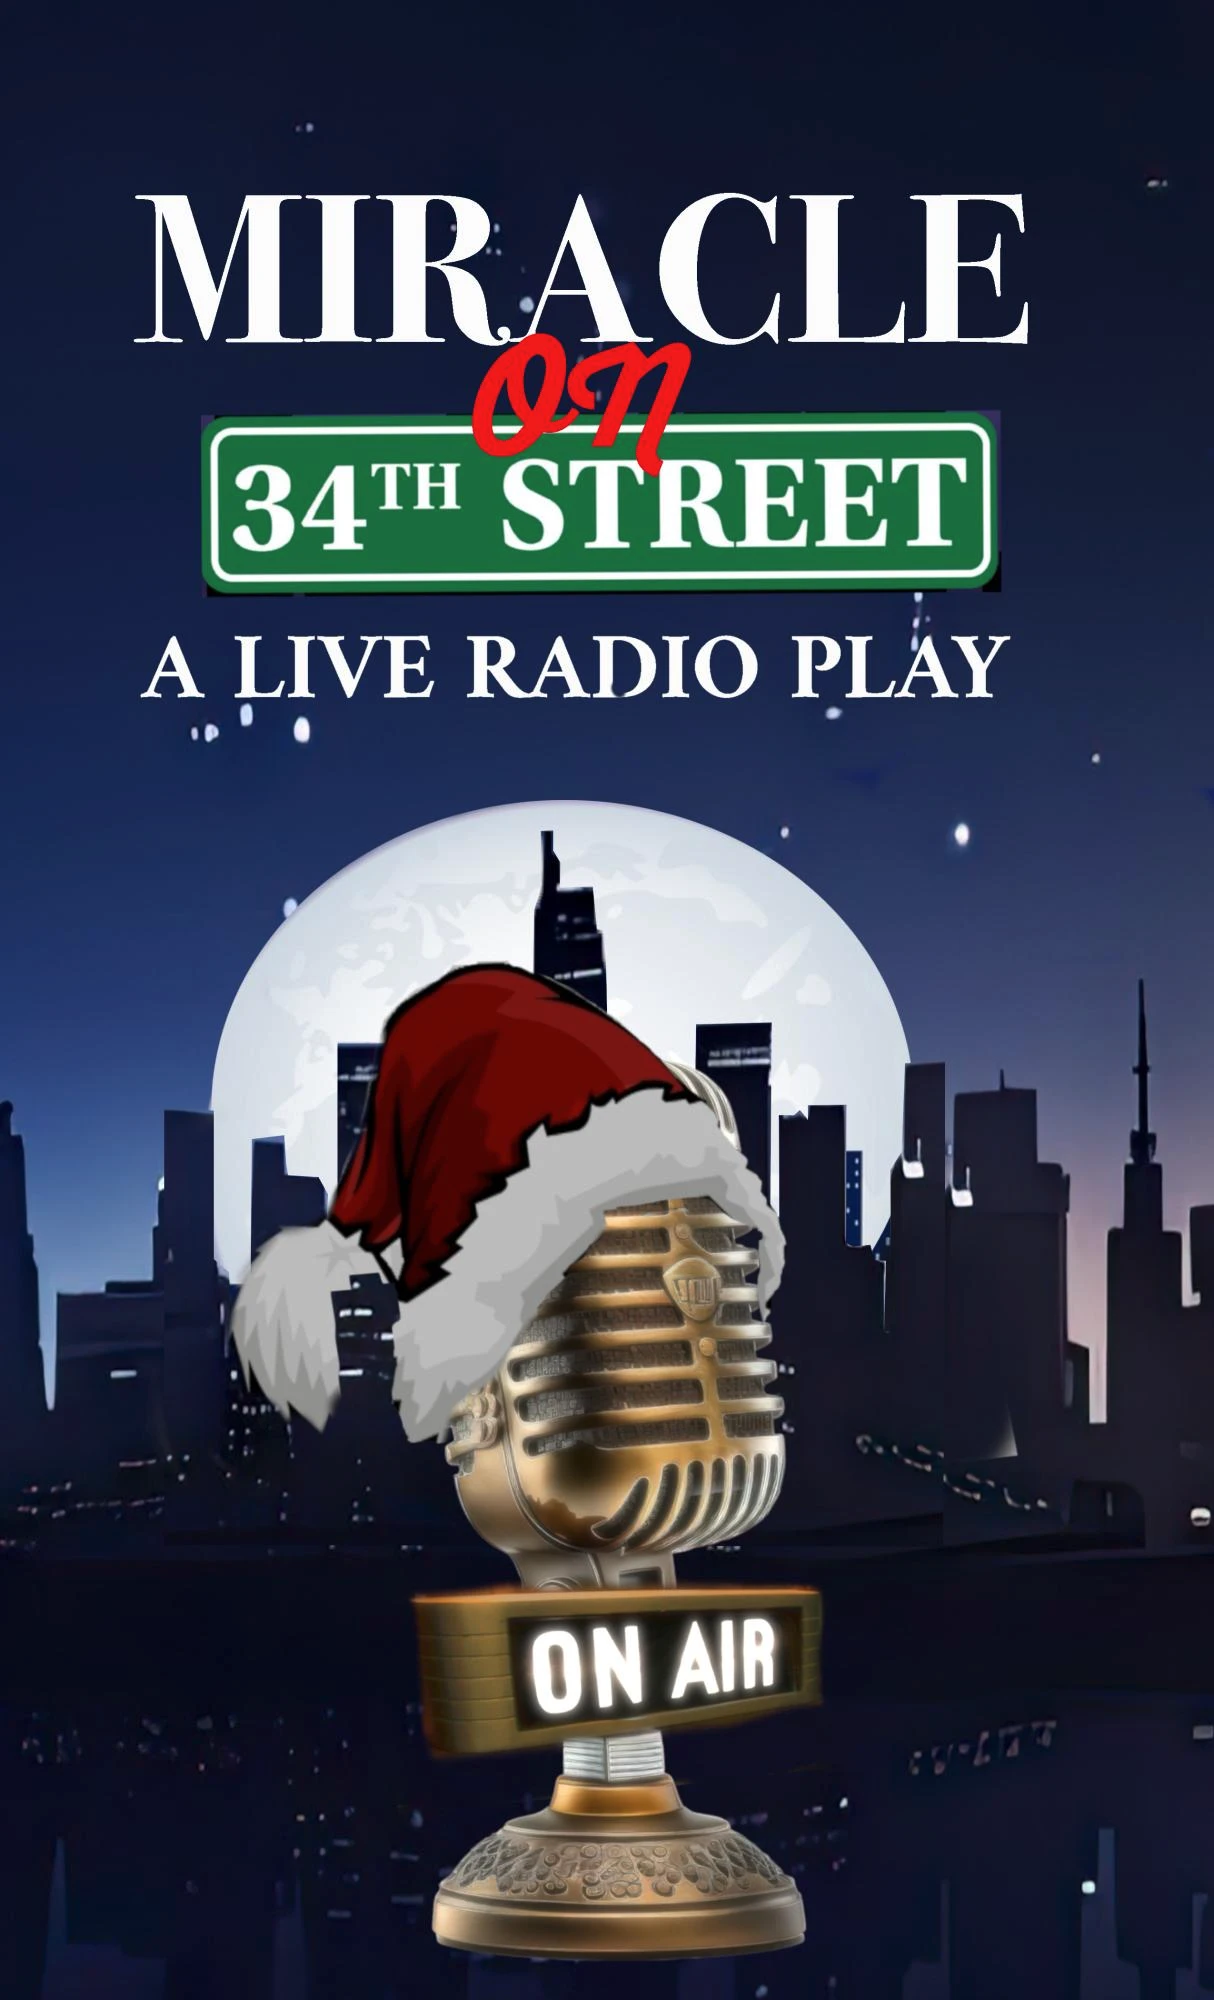 Miracle on 34th Street - A Live Radio Play